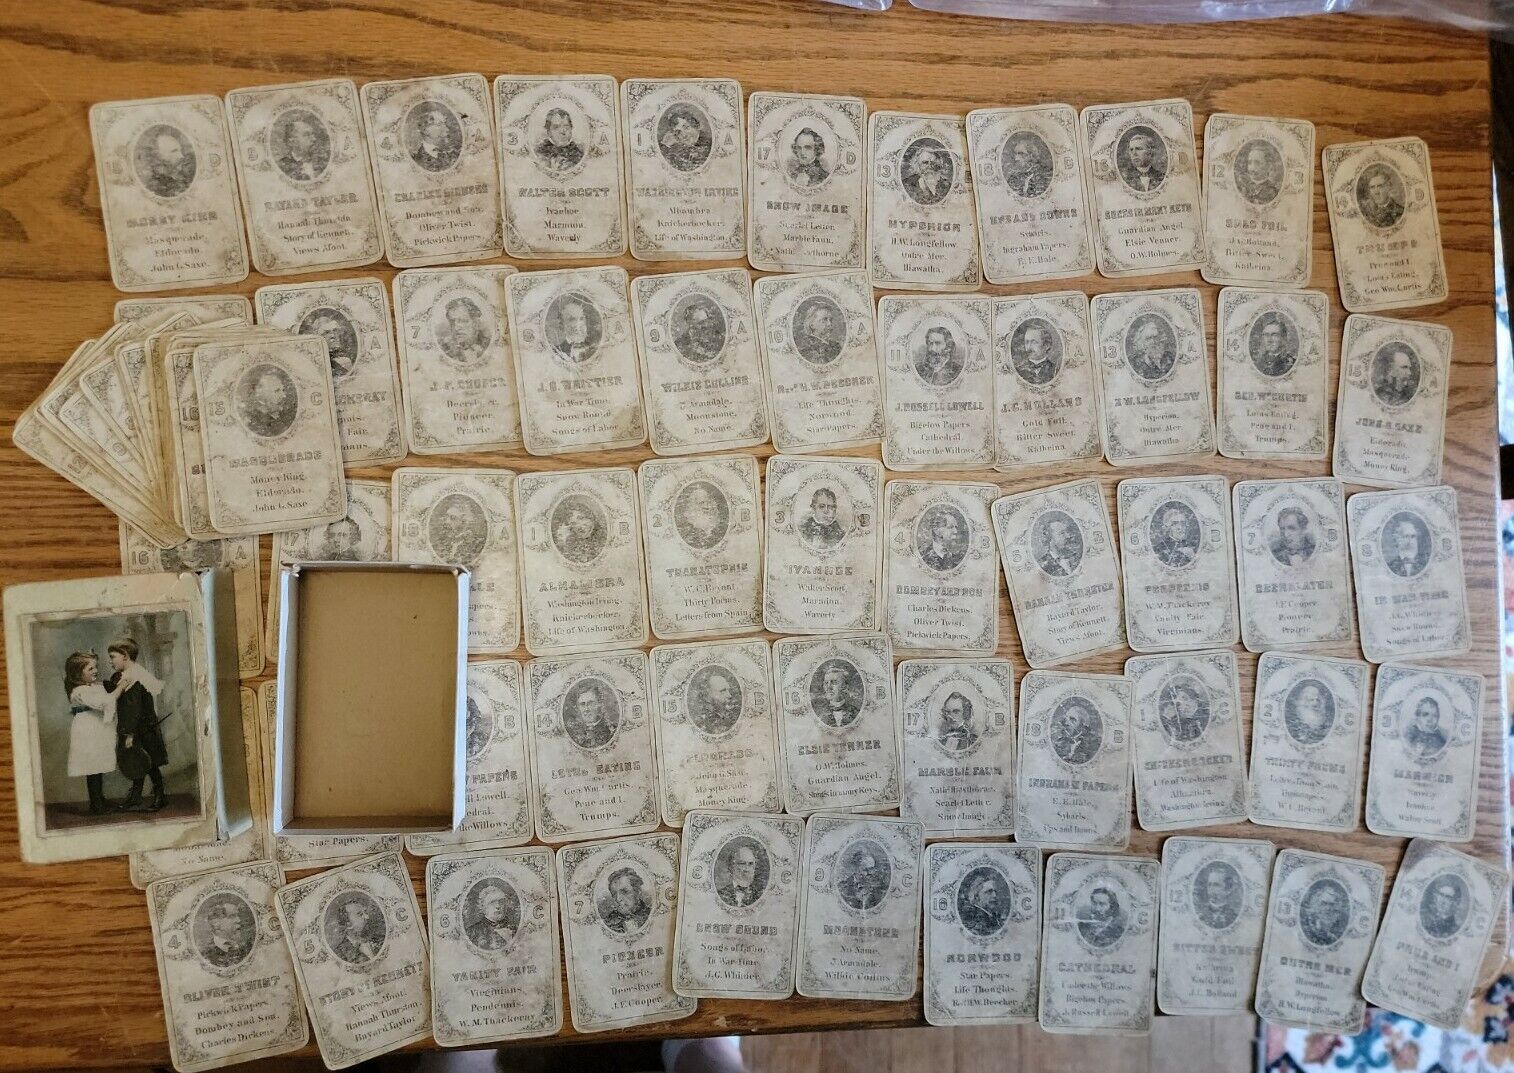 72 LOT SET 1880S AUTHOR PLAYING TRADING TRADE CARDS HISTORICAL ANTIQUE RARE OLD